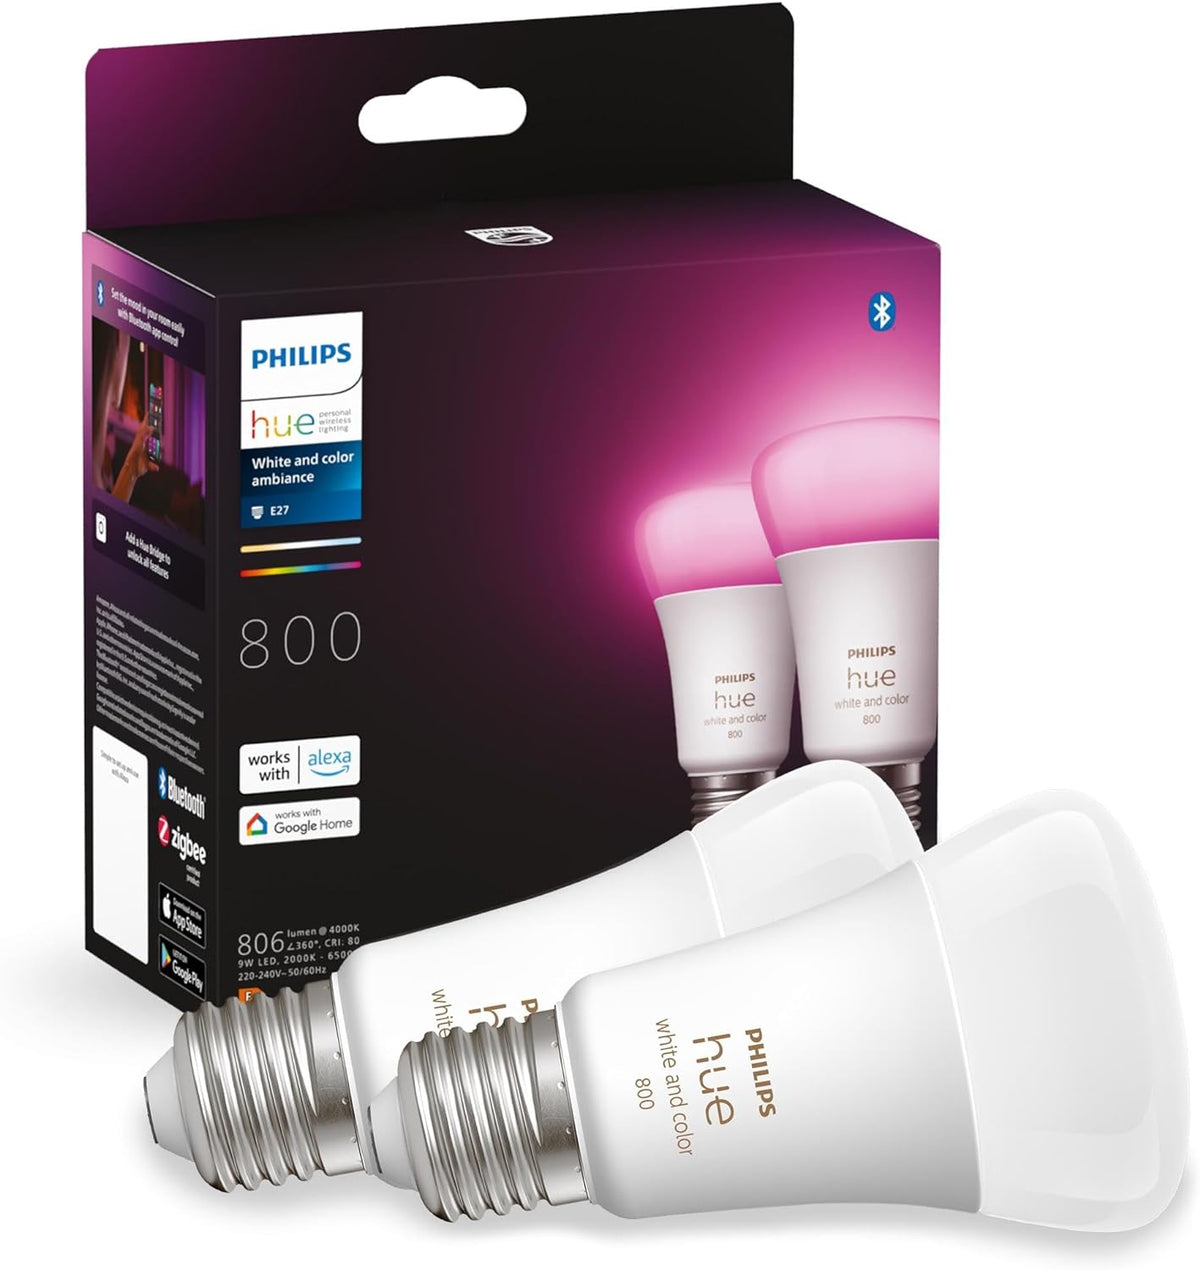 Philips Hue White and Colour Ambiance Smart Light Bulb 2 Pack 60W - 800 Lumen [E27 Edison Screw] With Bluetooth. Works with Alexa, Google Assistant and Apple Homekit